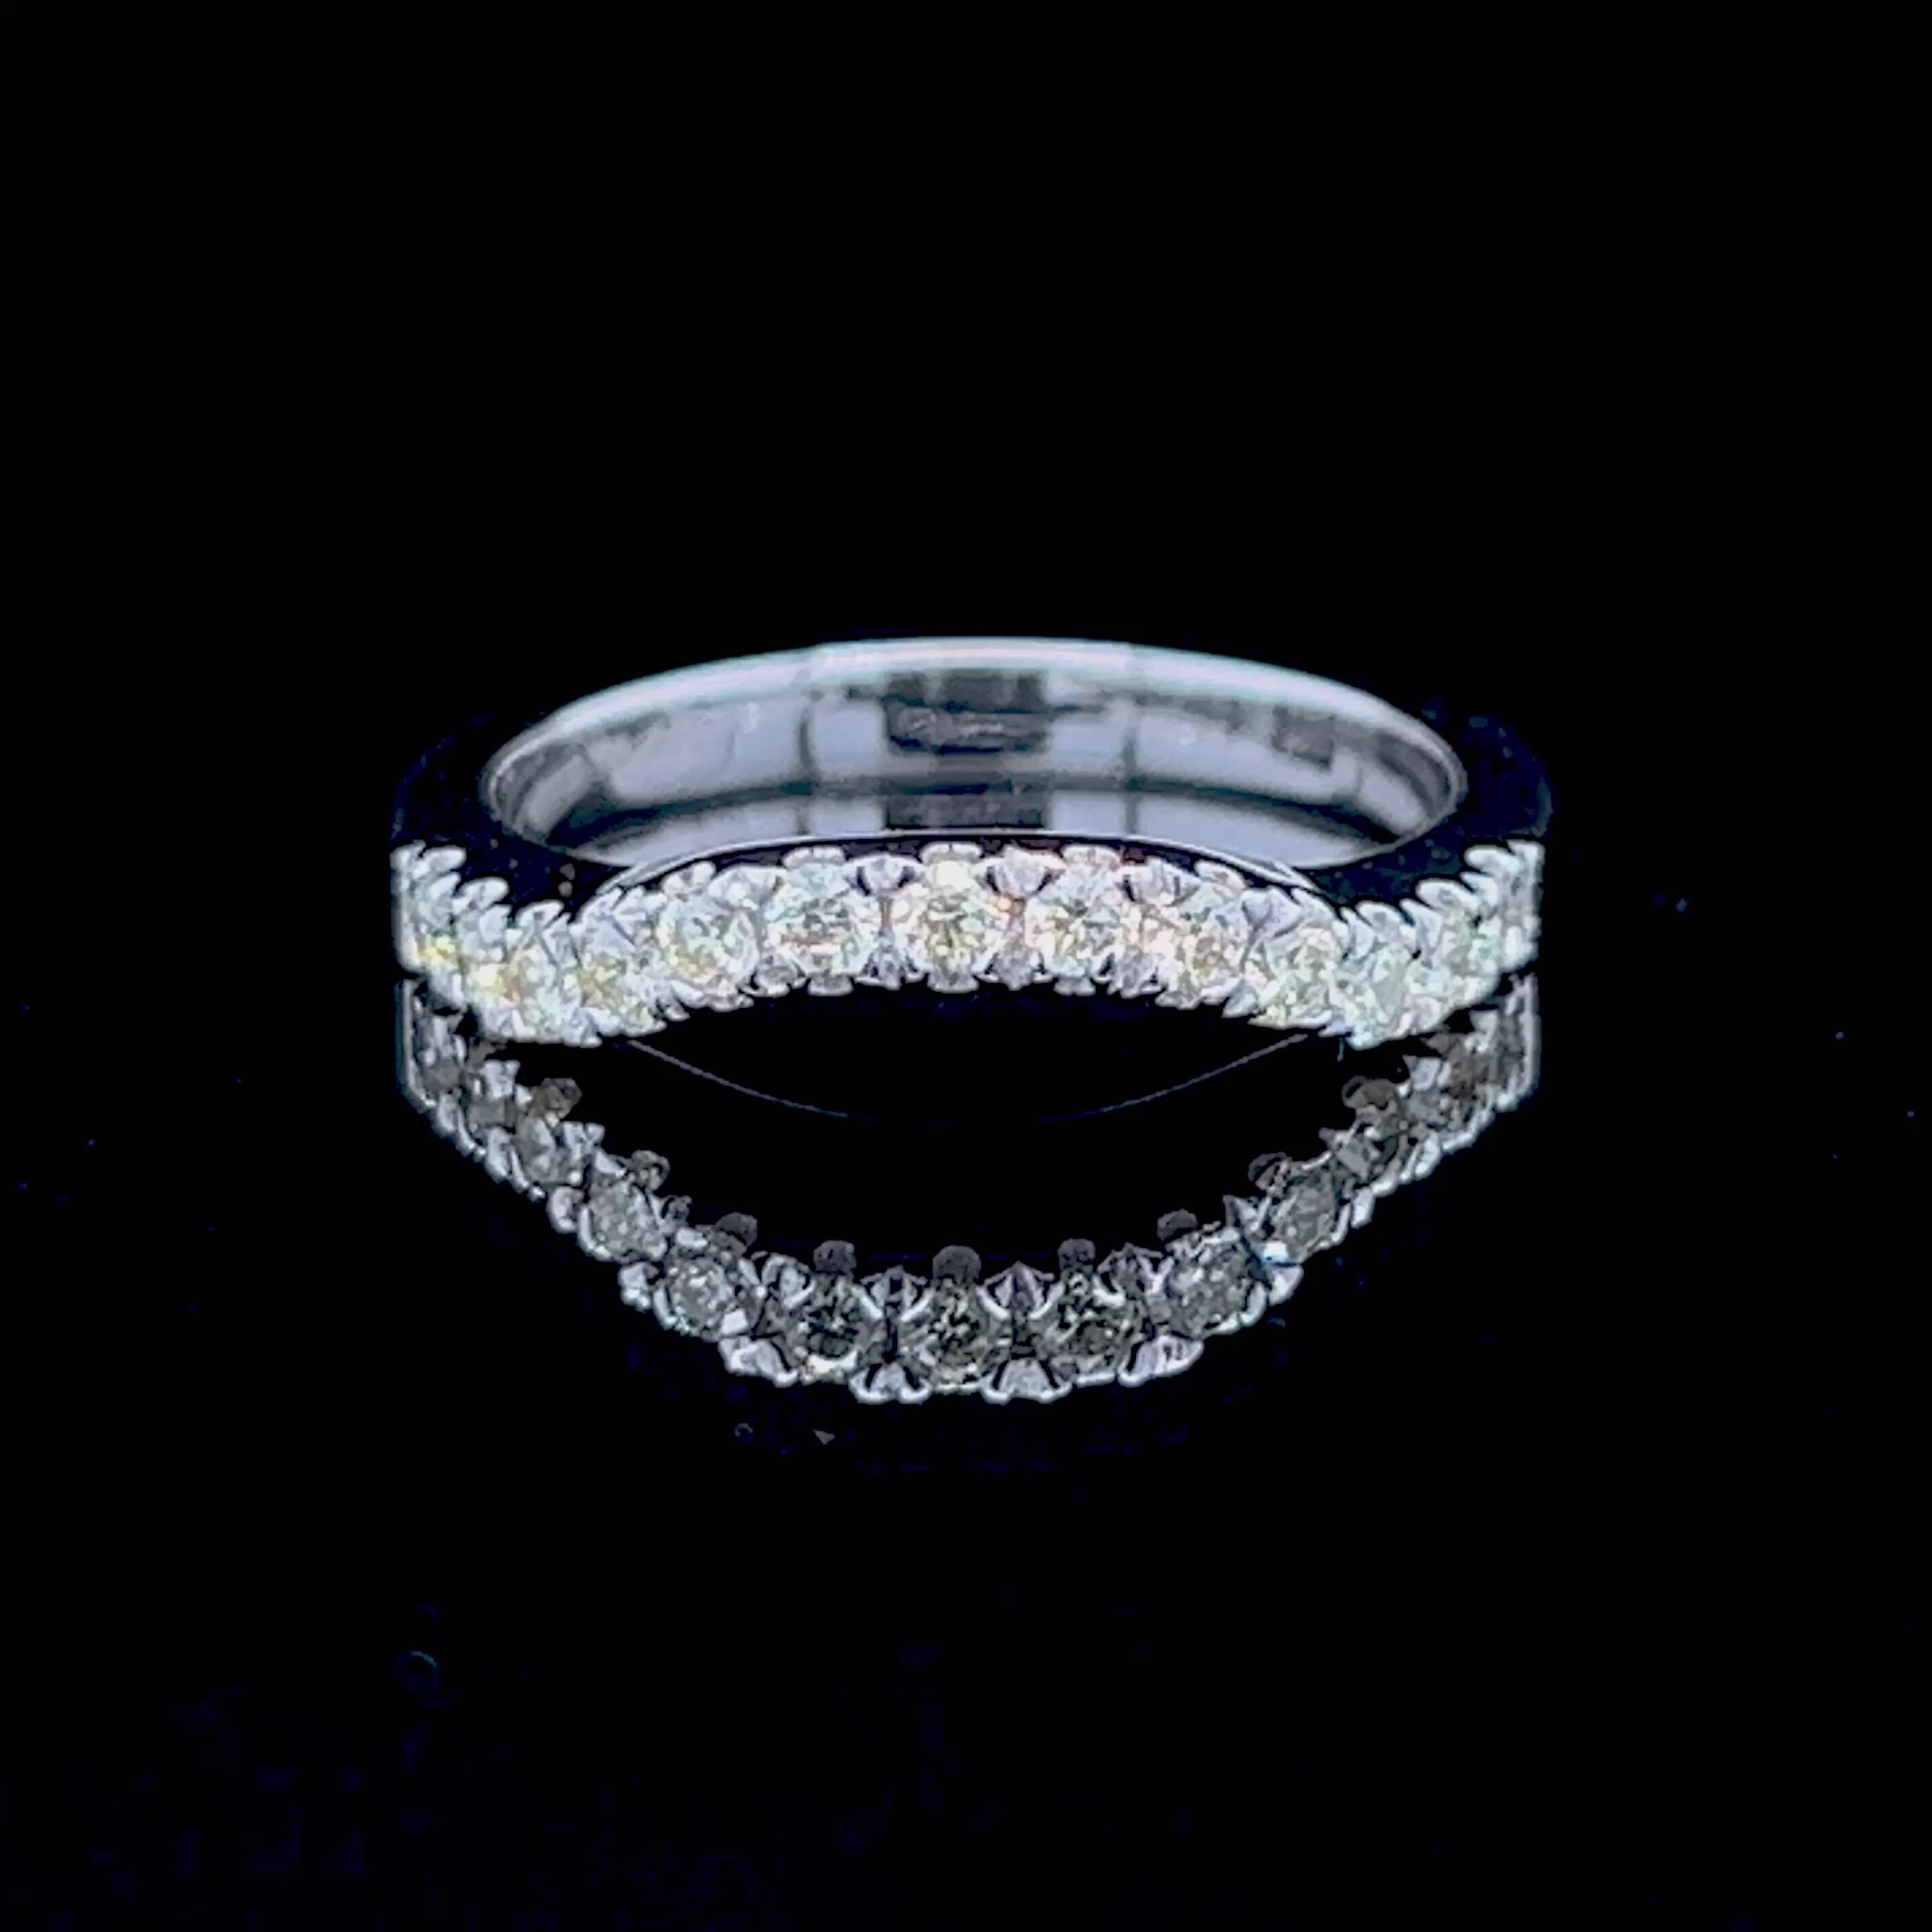 Special 0.30 CT Round Cut Diamond Wedding Ring in 14KT White Gold PSRI1327